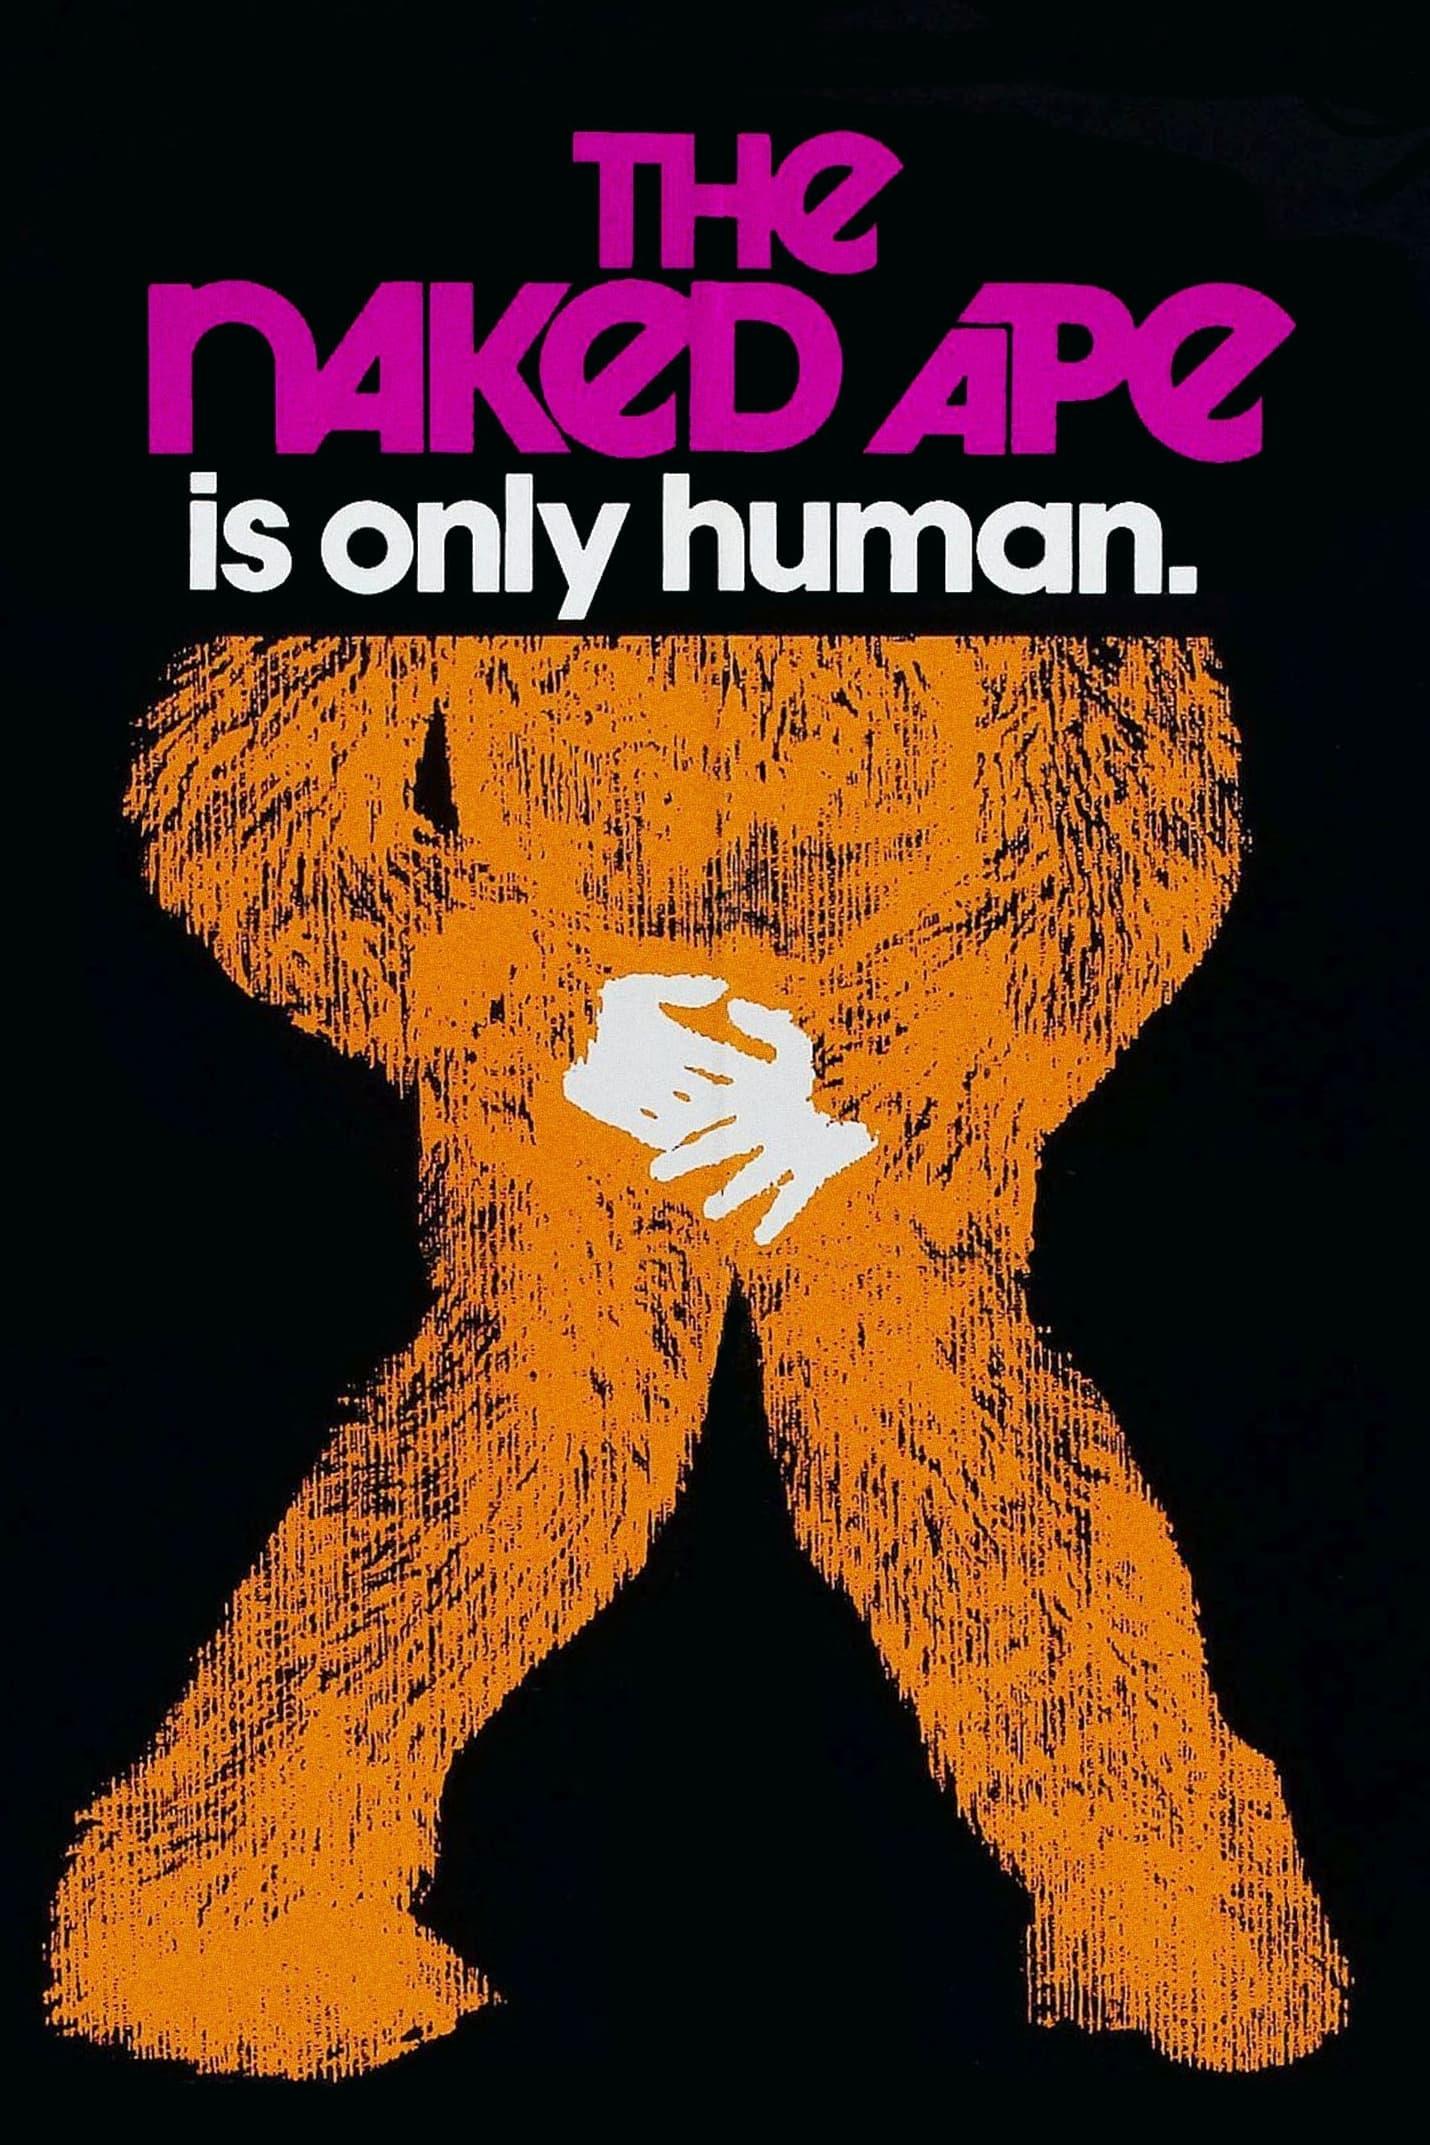 The Naked Ape poster